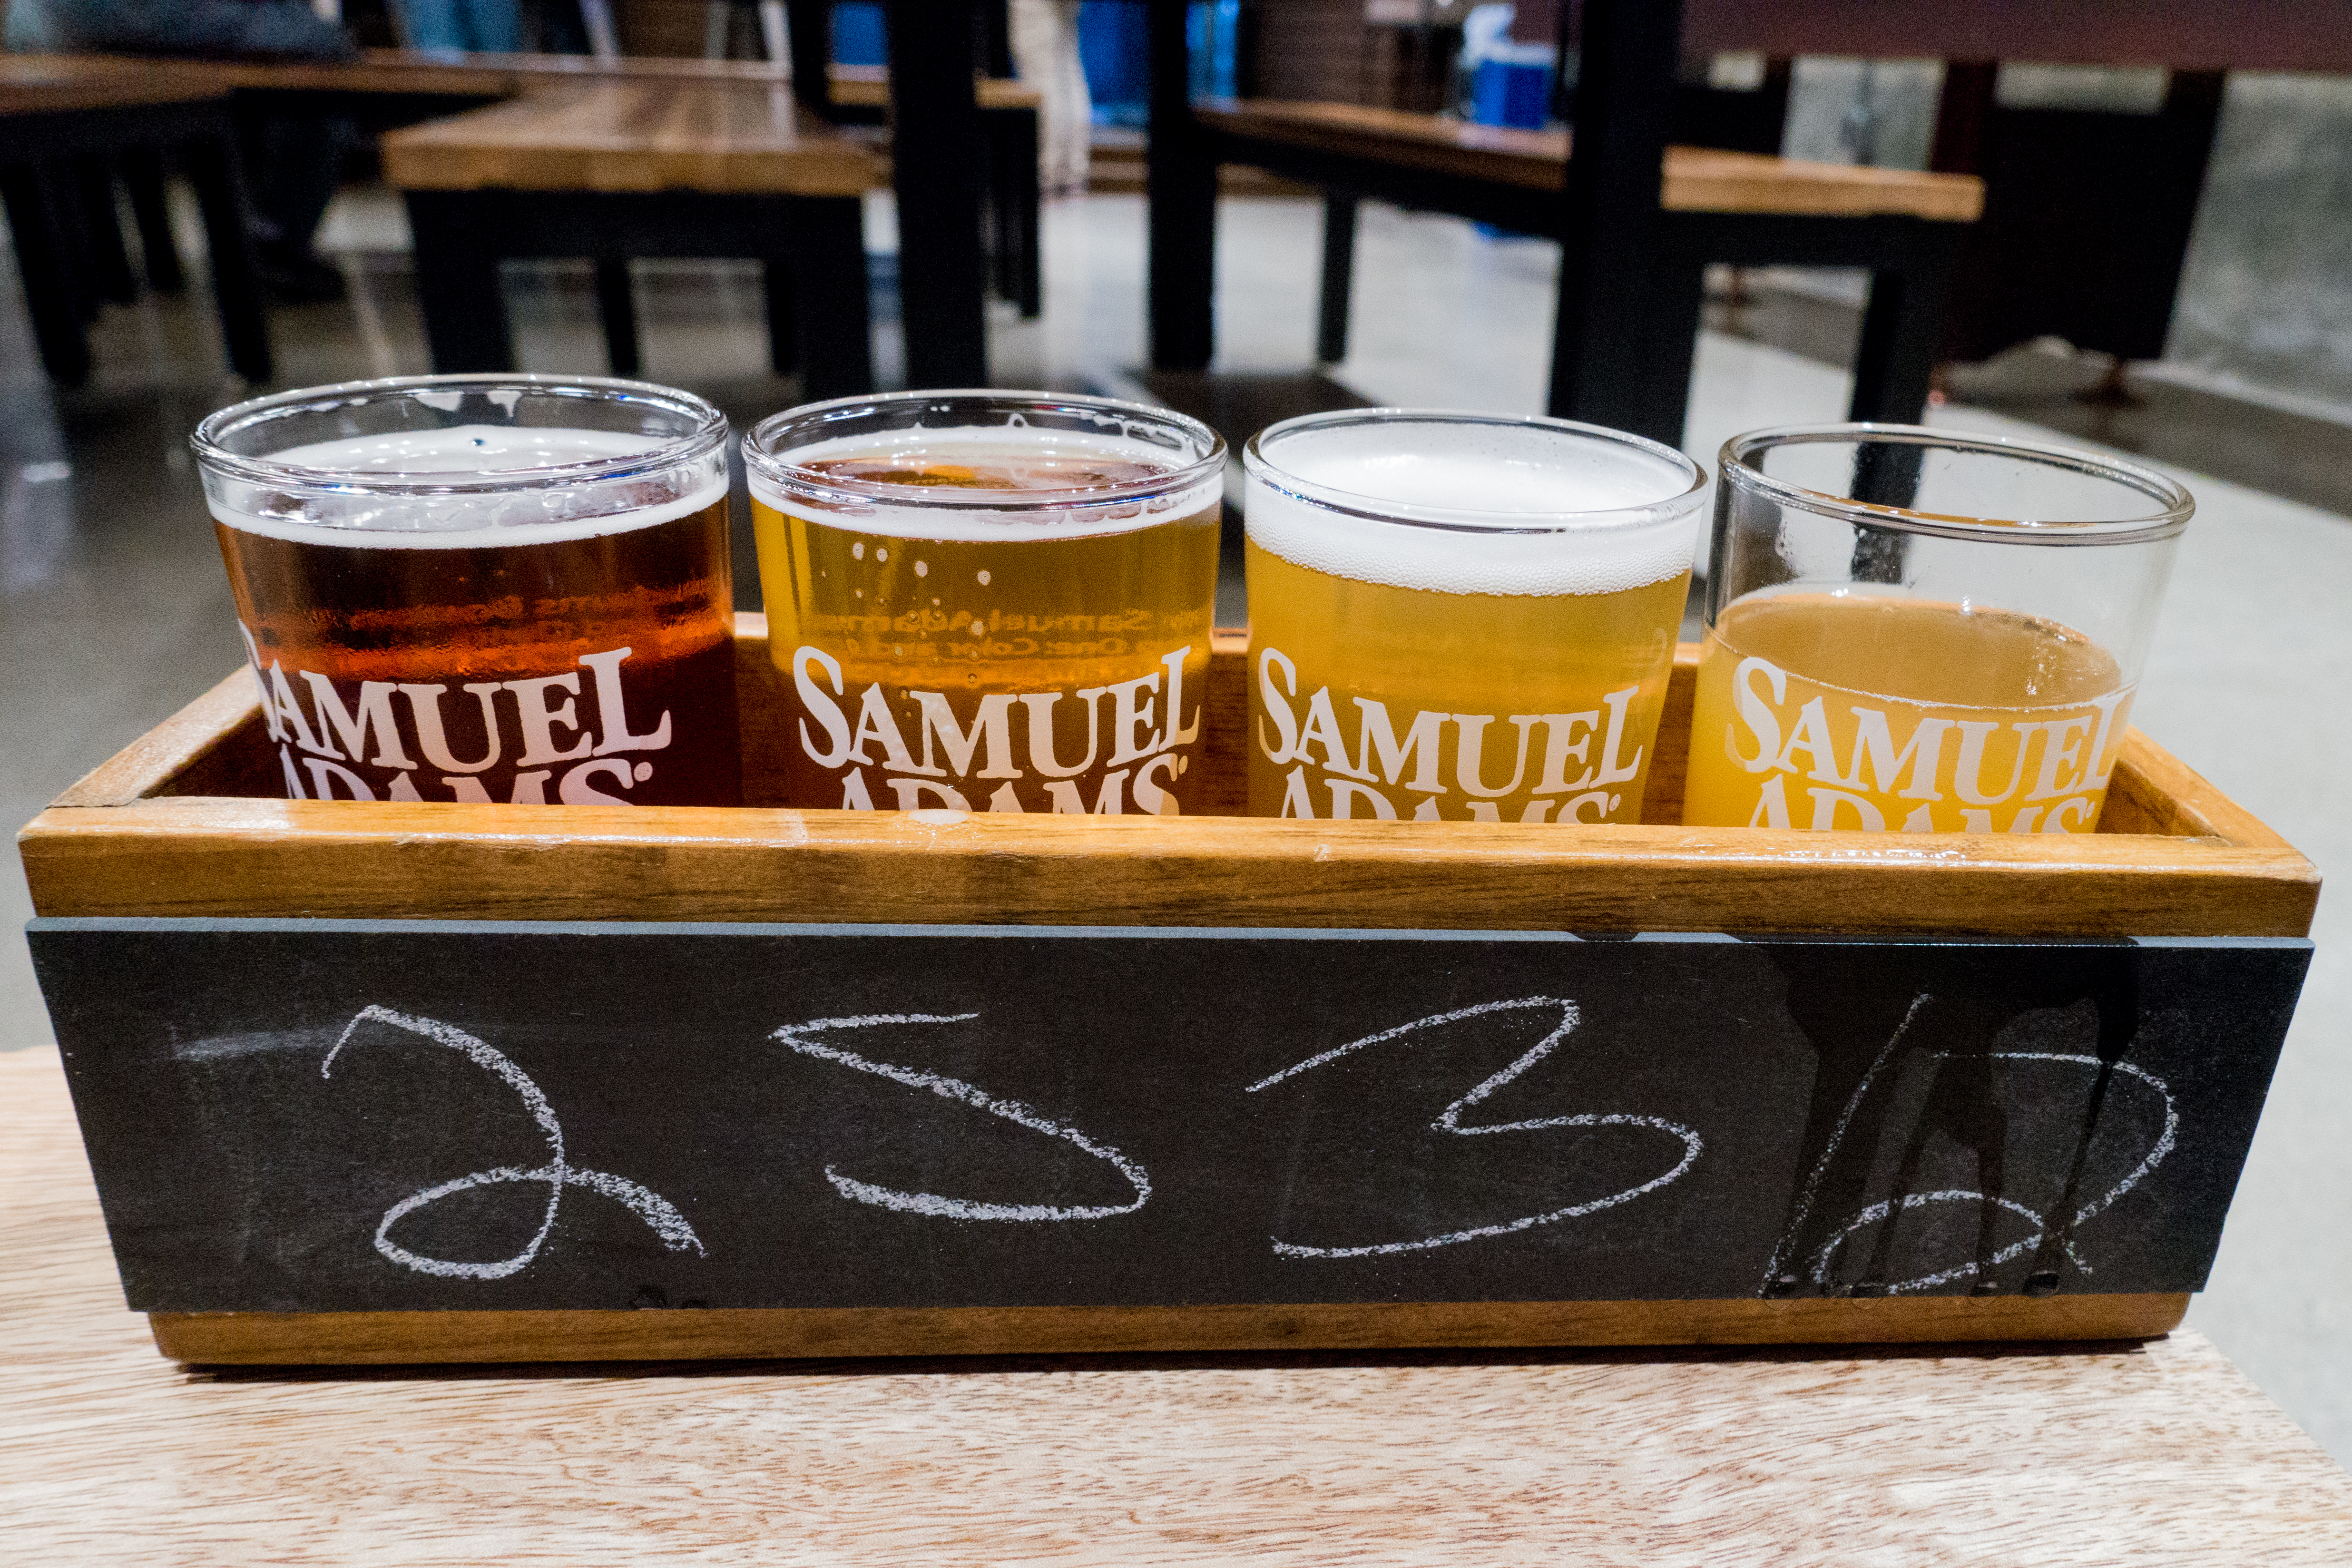 Beer Flight at the Sam Adam's Tap Room during a Long Weekend in Boston